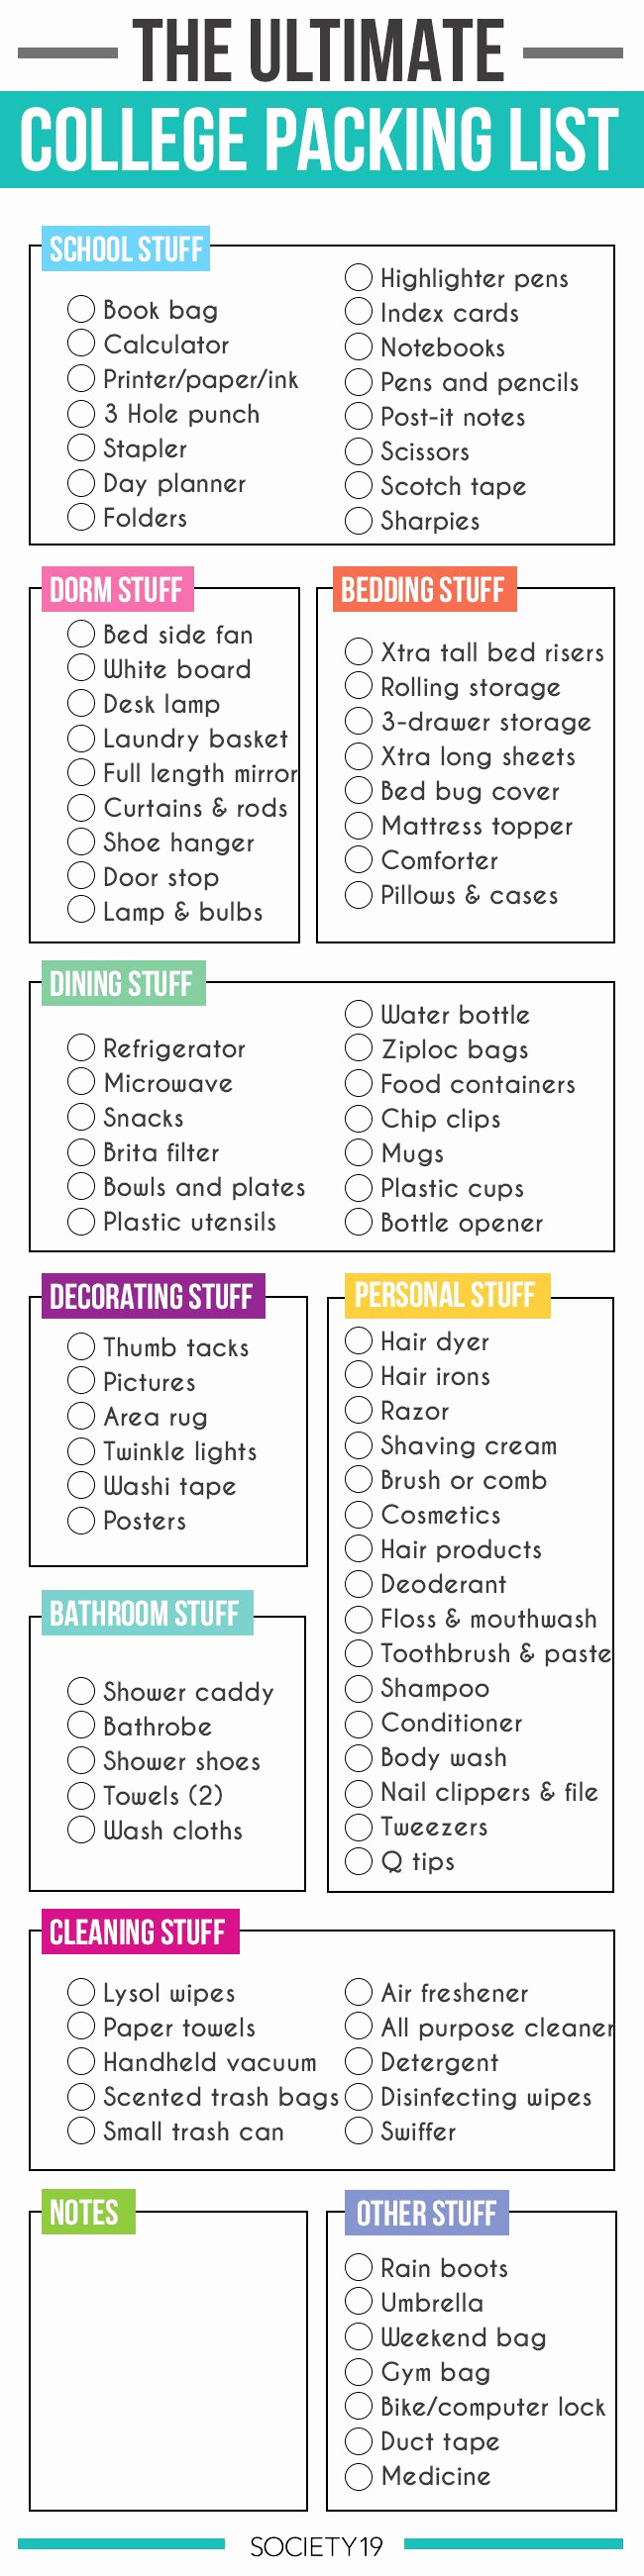 College Packing List Pdf New Best Images About [college] Trends On Pinterest